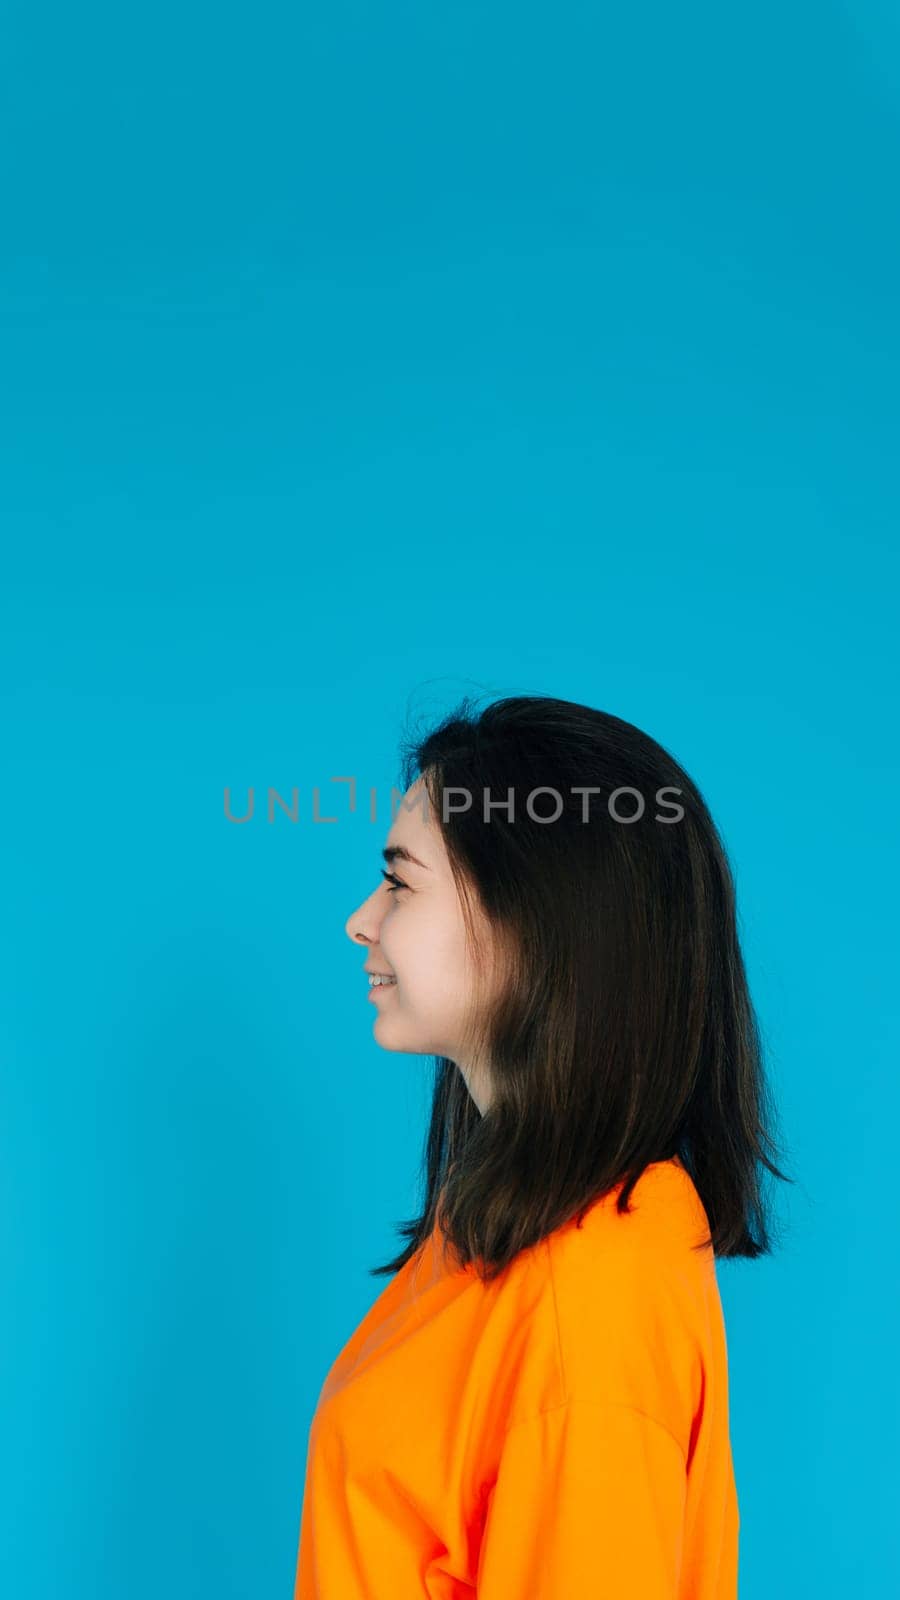 Radiant Young Woman in Stylish Orange Attire Smiling with a Beaming Toothed Smile, Profile Portrait, Isolated on Blue Background by ViShark